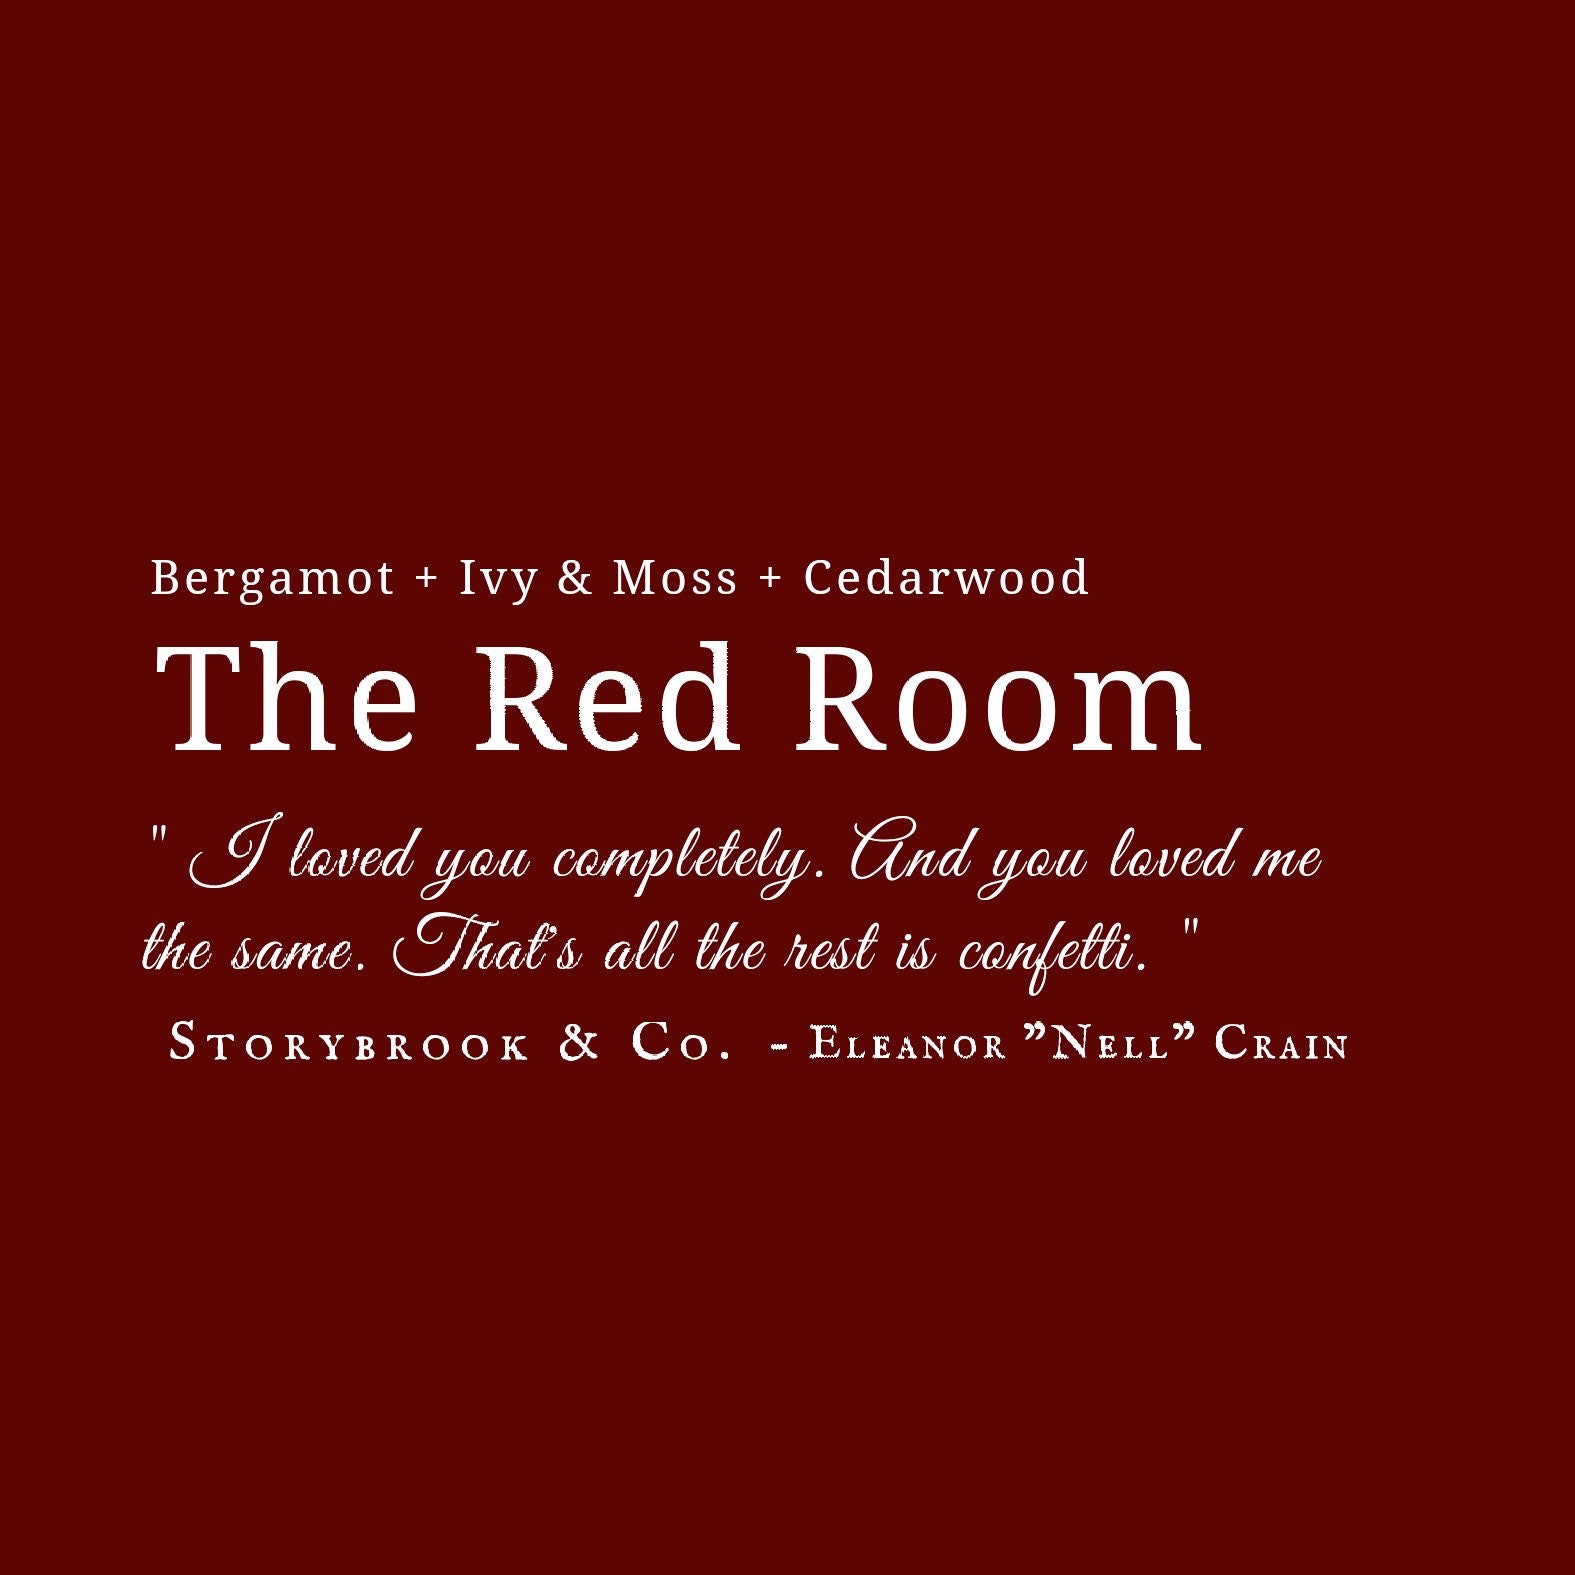 Haunting of Hill House the Red Room Coconut Apricot Wax - Etsy